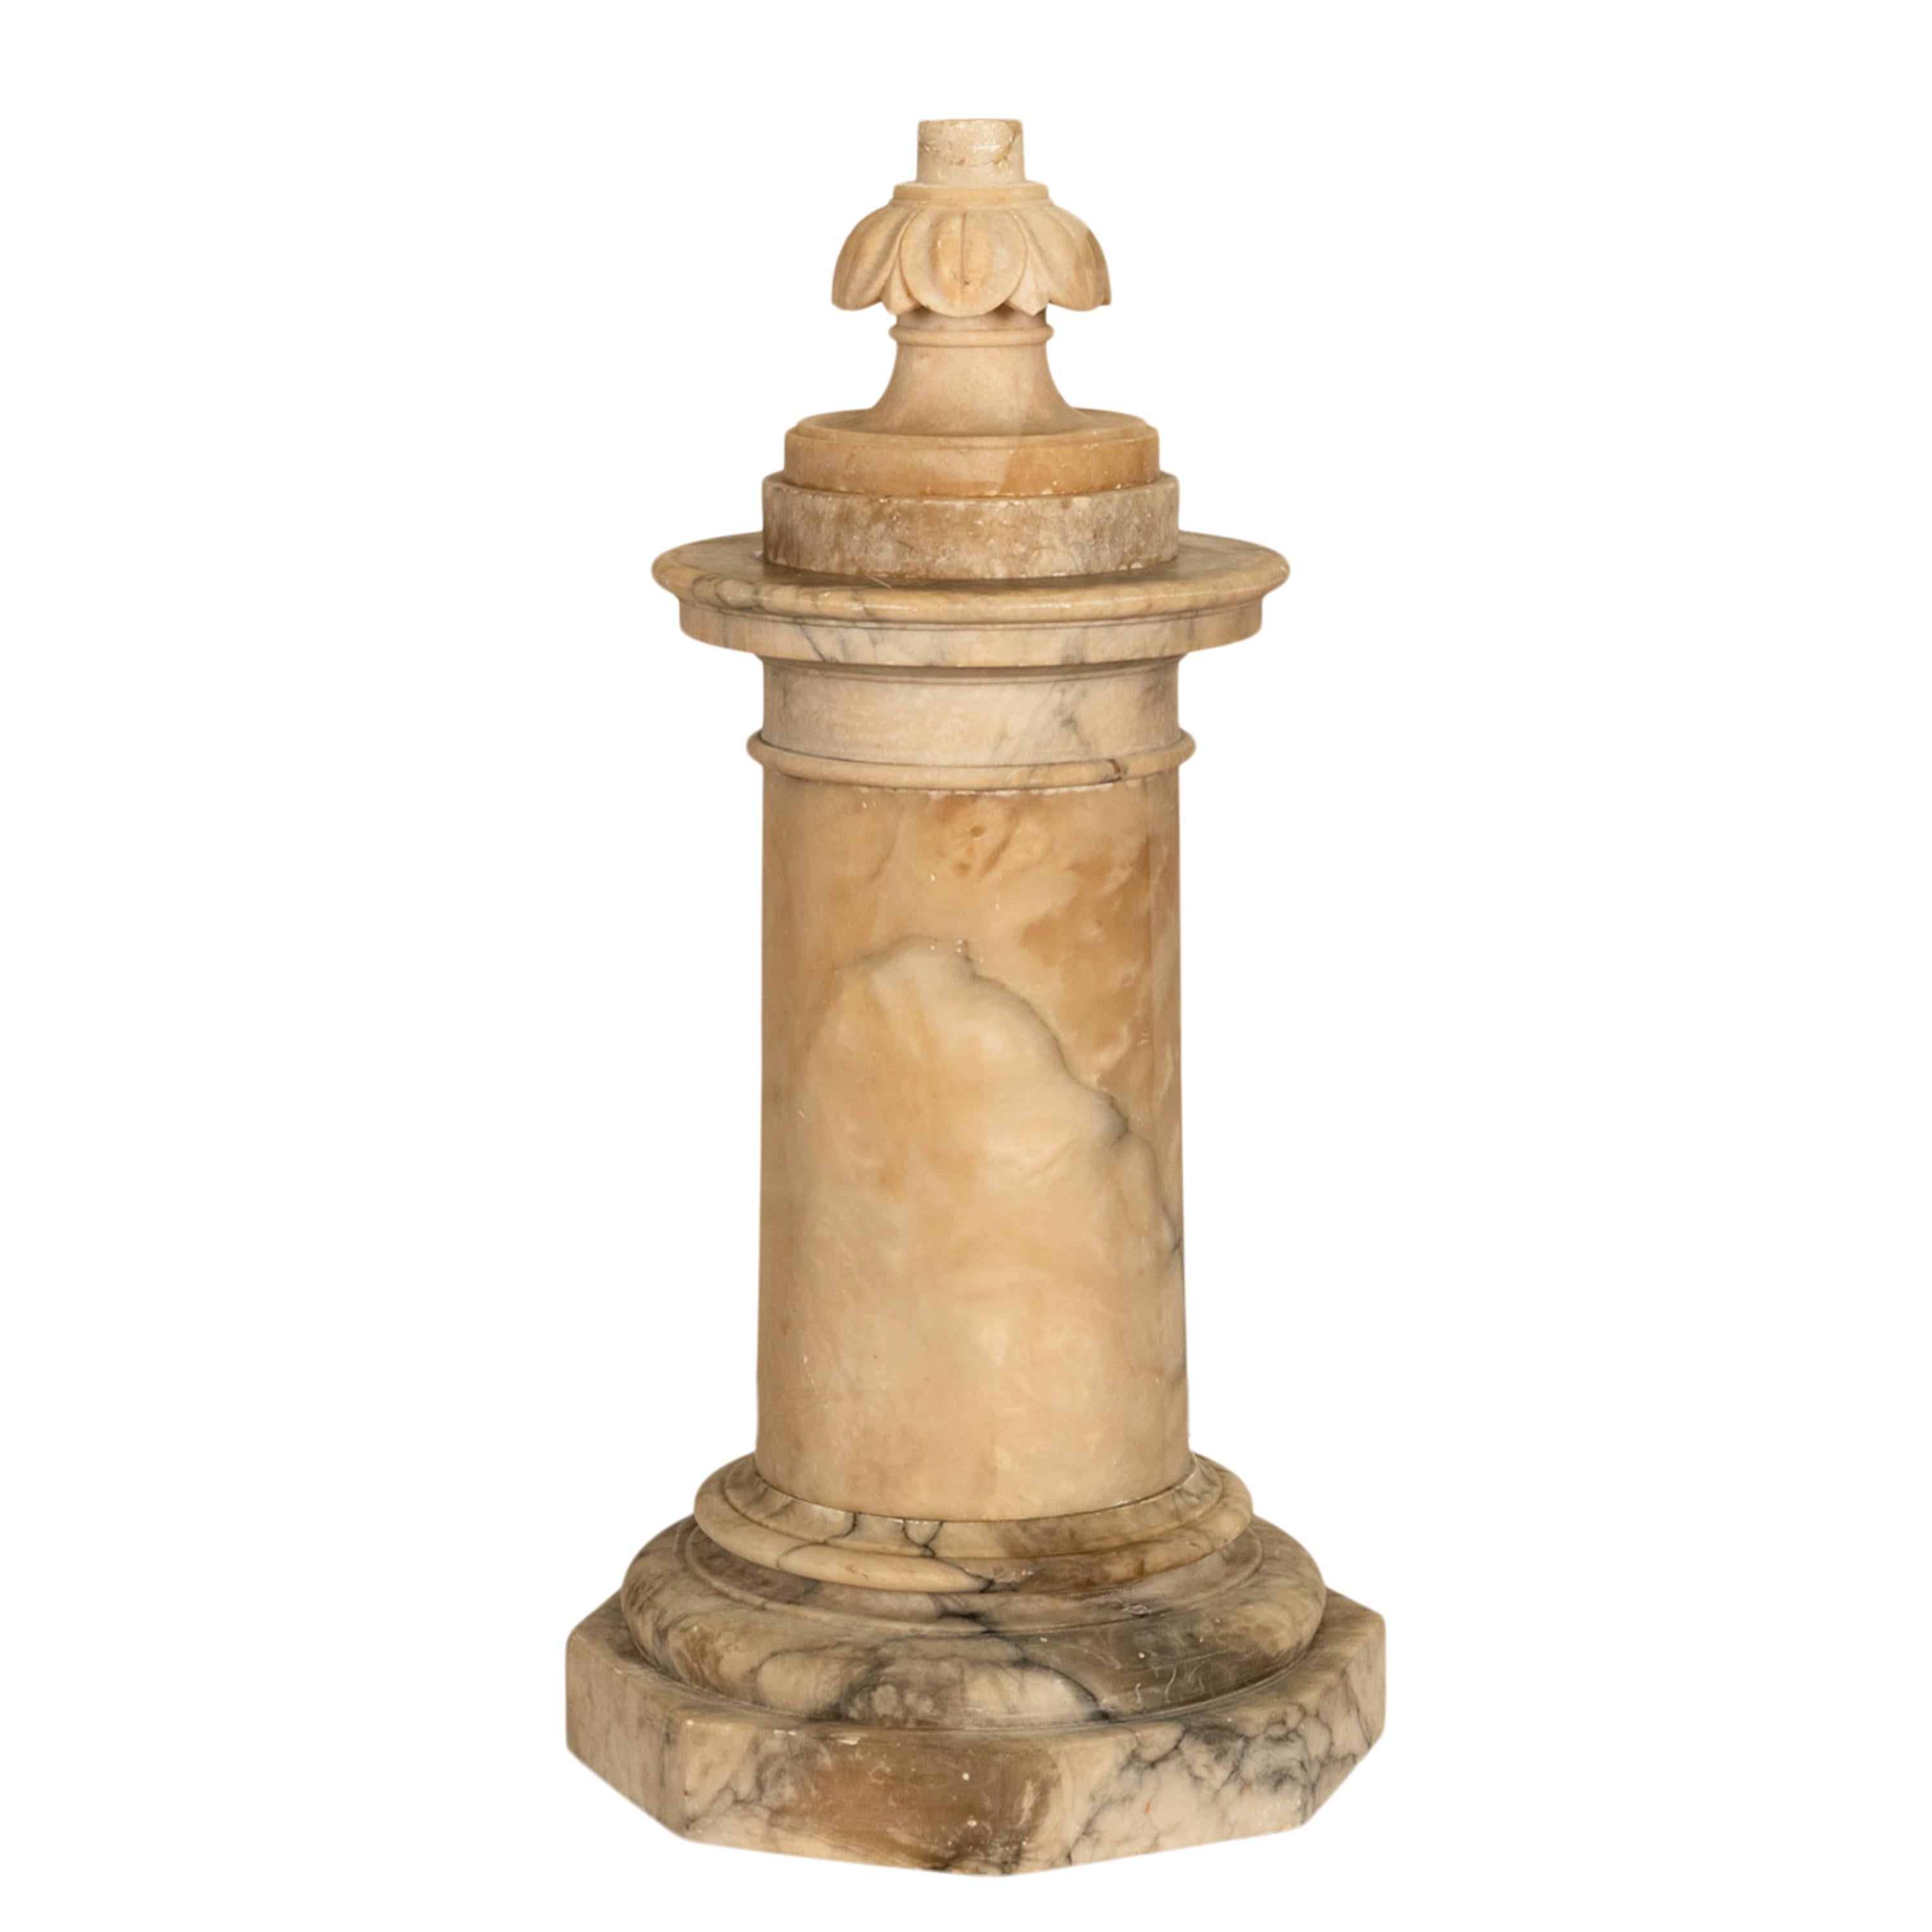 Antique 19th Century Italian Carved Alabaster Neoclassical Urn on Pedestal 1850 For Sale 6